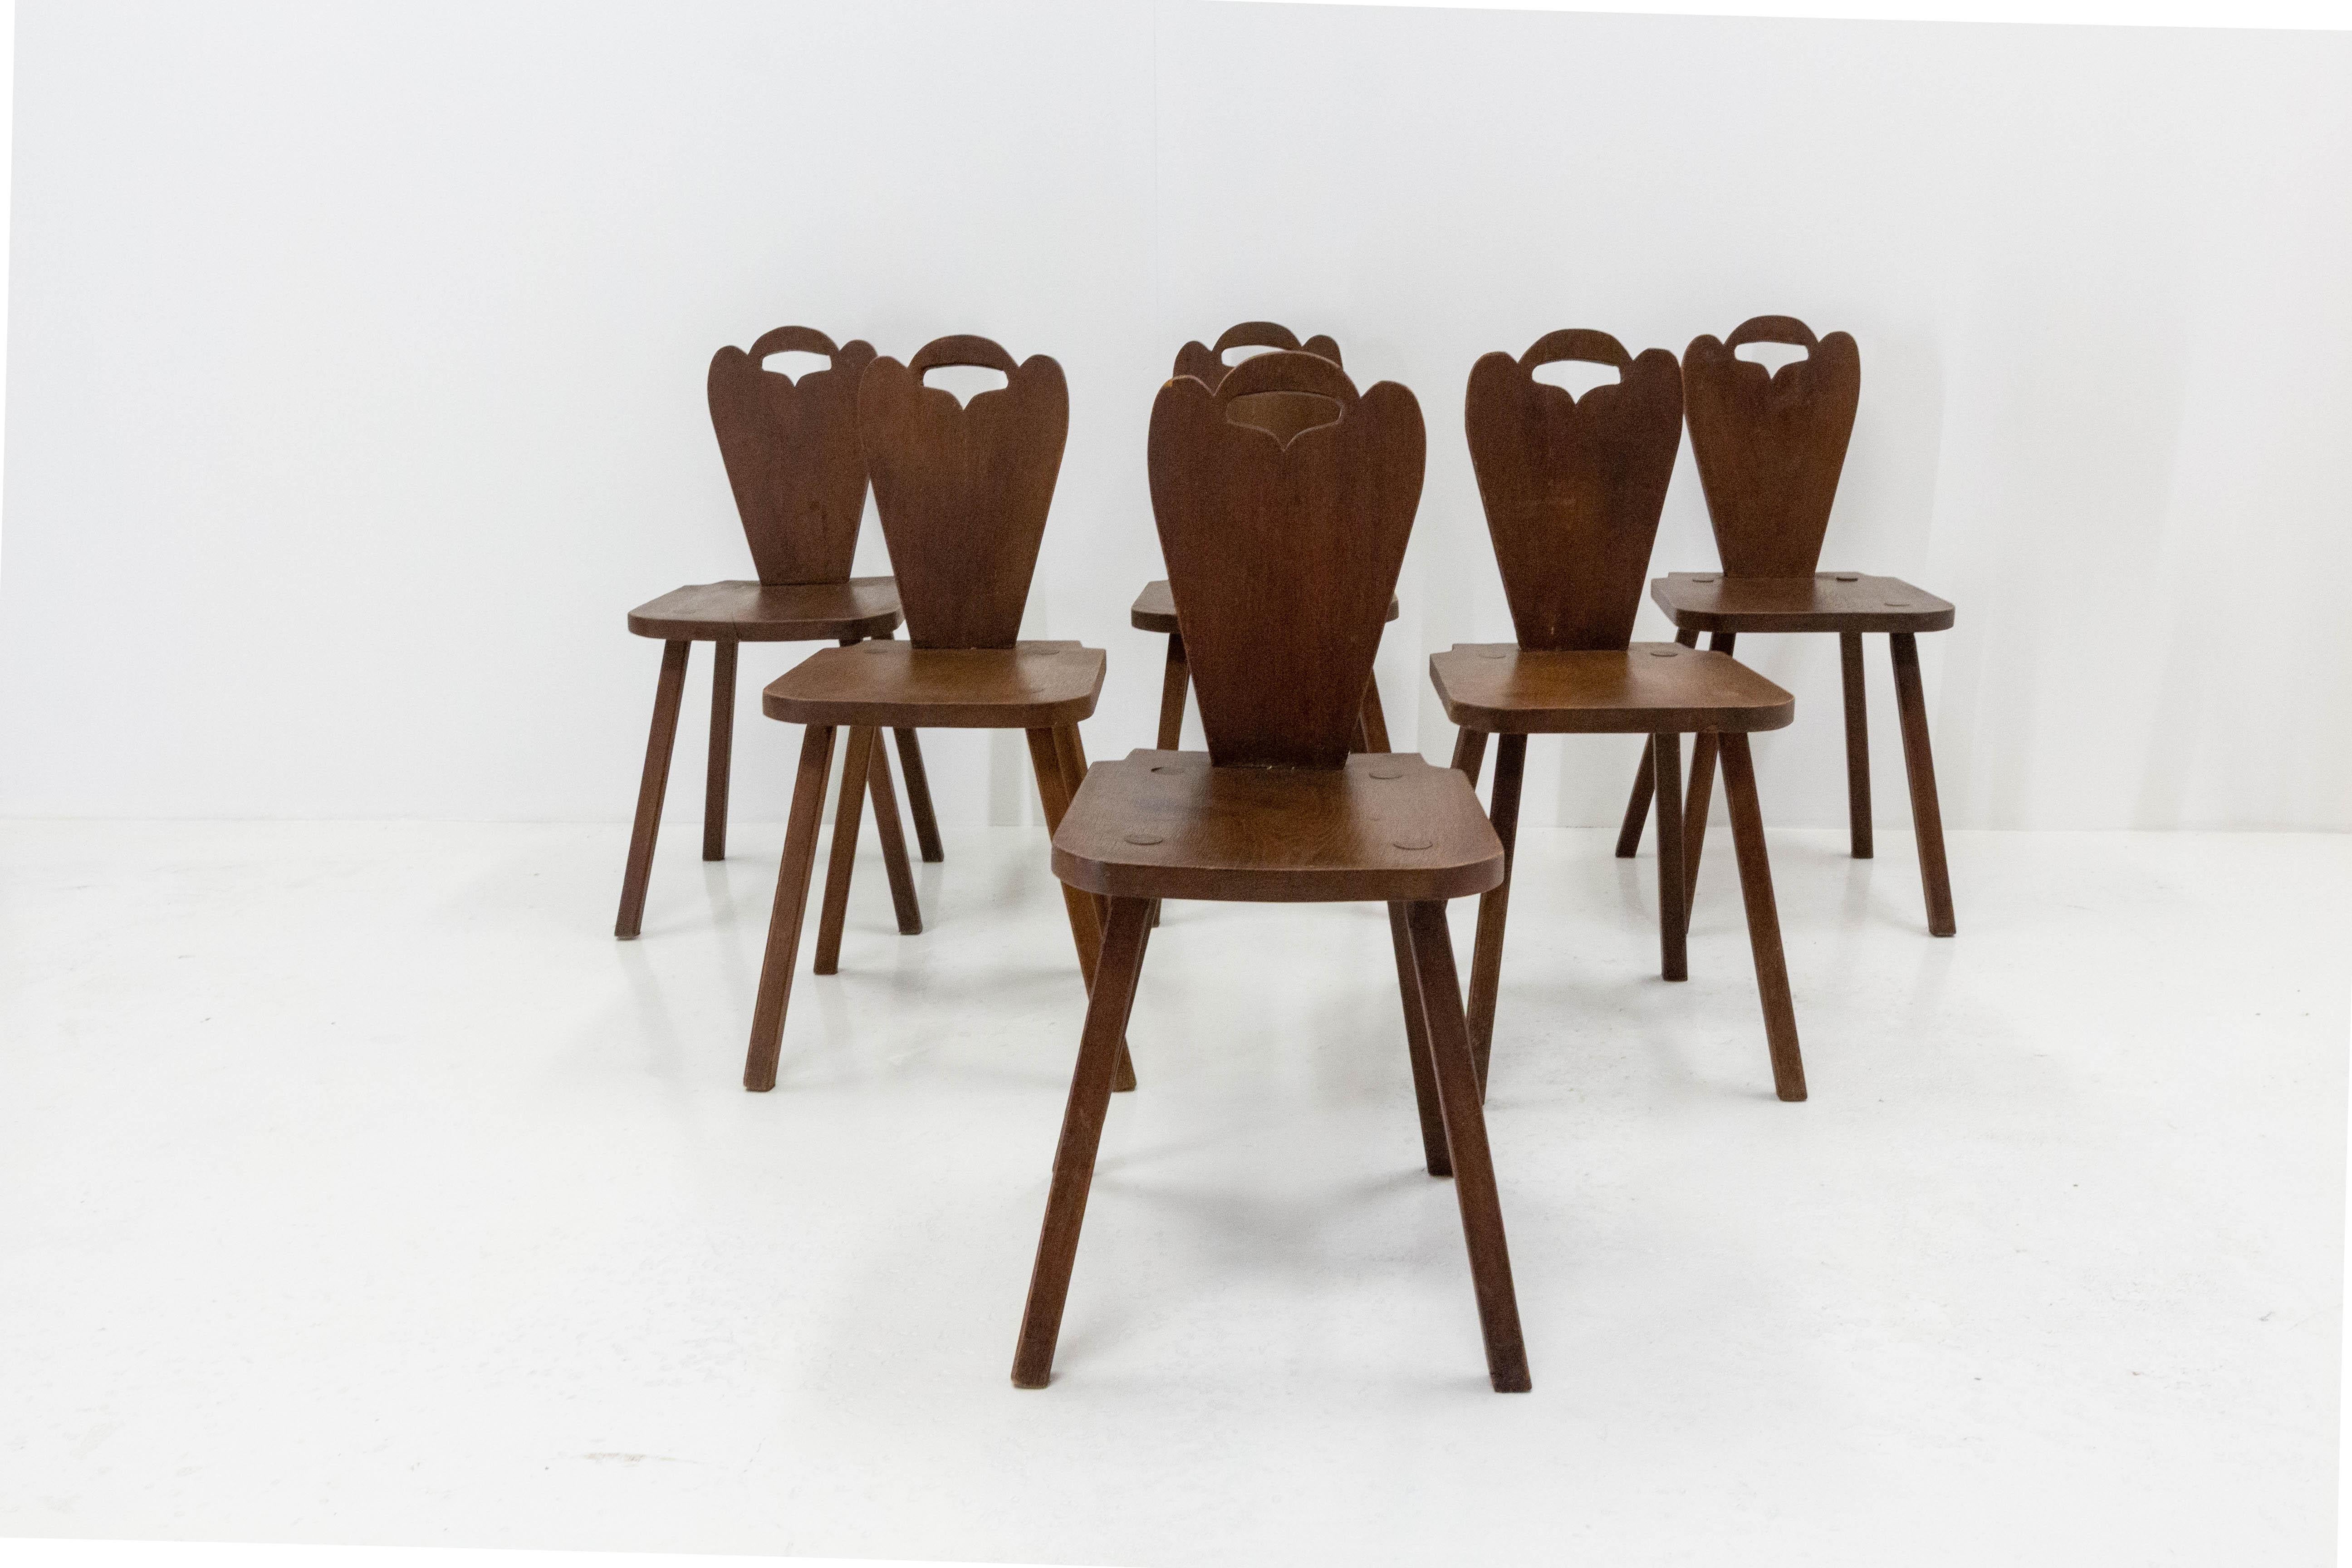 Six dining chairs, Swiss Alp escabelles in the brutalist style
French, midcentury circa 1940/1960
Charactereful
Good condition

shipping:
1 wooden case 120 / 52 / 85 cm 45 kg.
 